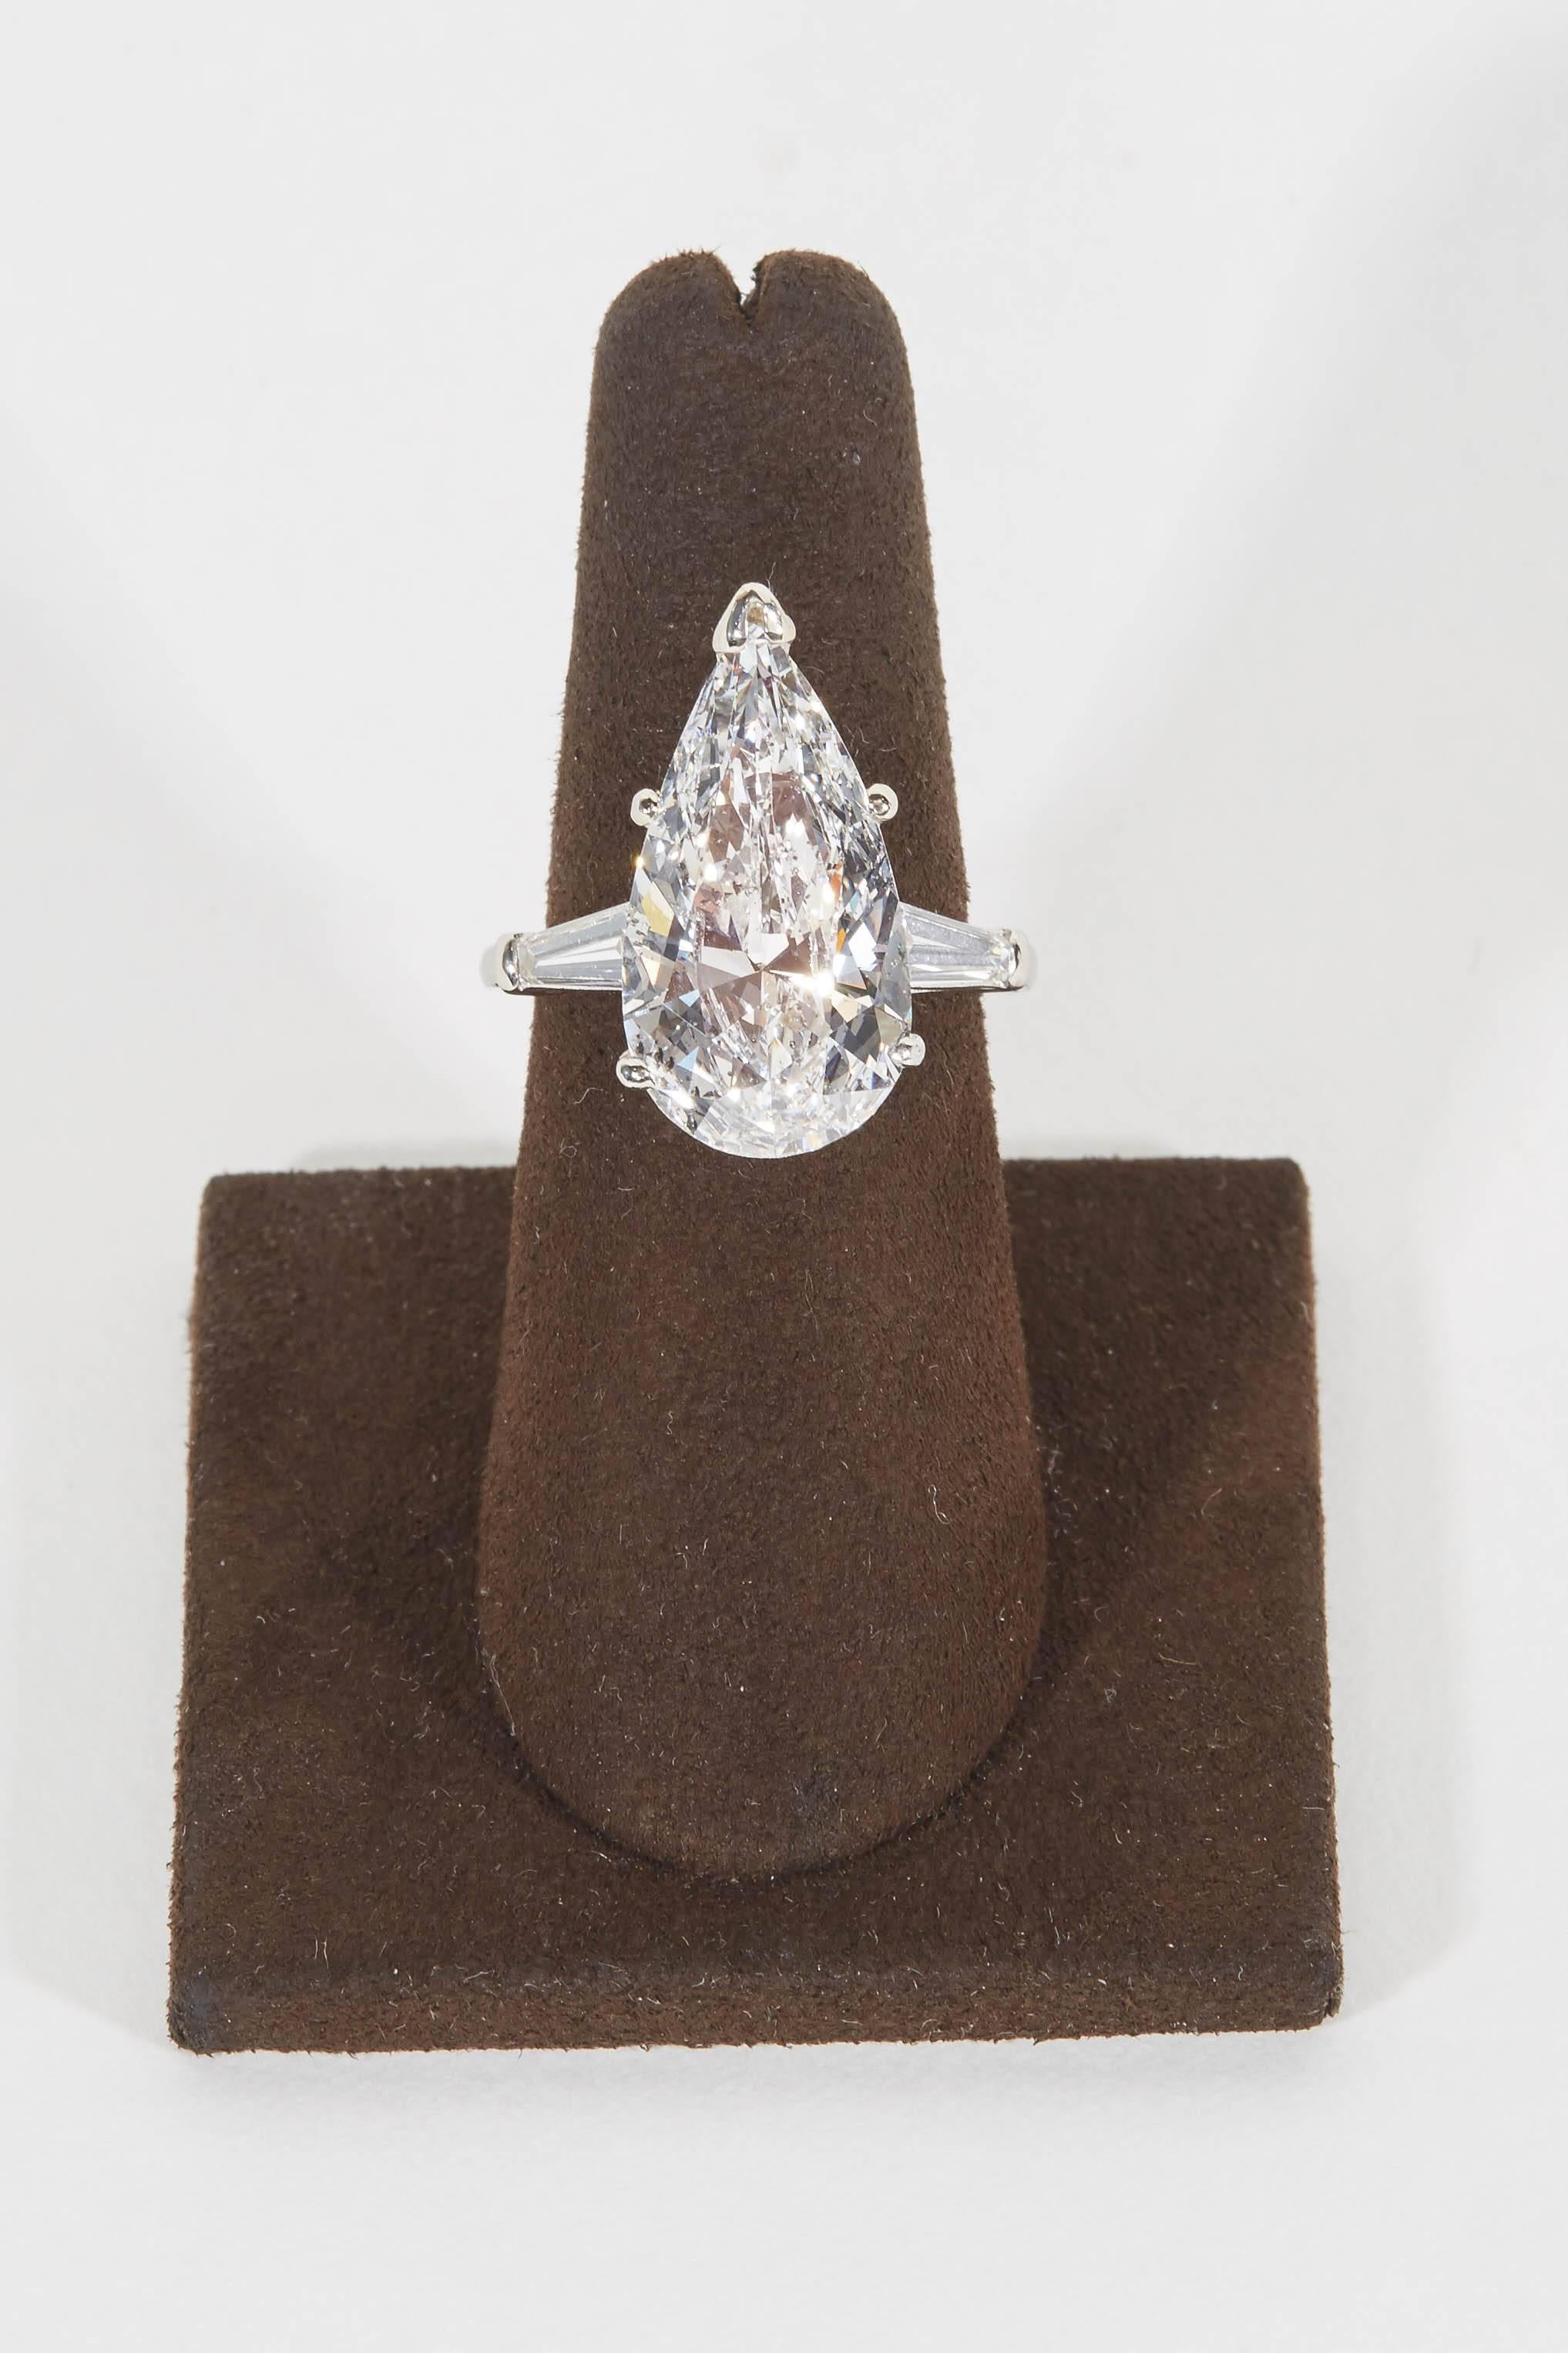 
A beautiful white diamond, full of brilliance and fire. 

Eight carat GIA certified D color I1 pear shape set with .60 cts of baguette diamonds on a platinum setting. 

The pear shape has the most beautiful shape and the diamond is eye clean with